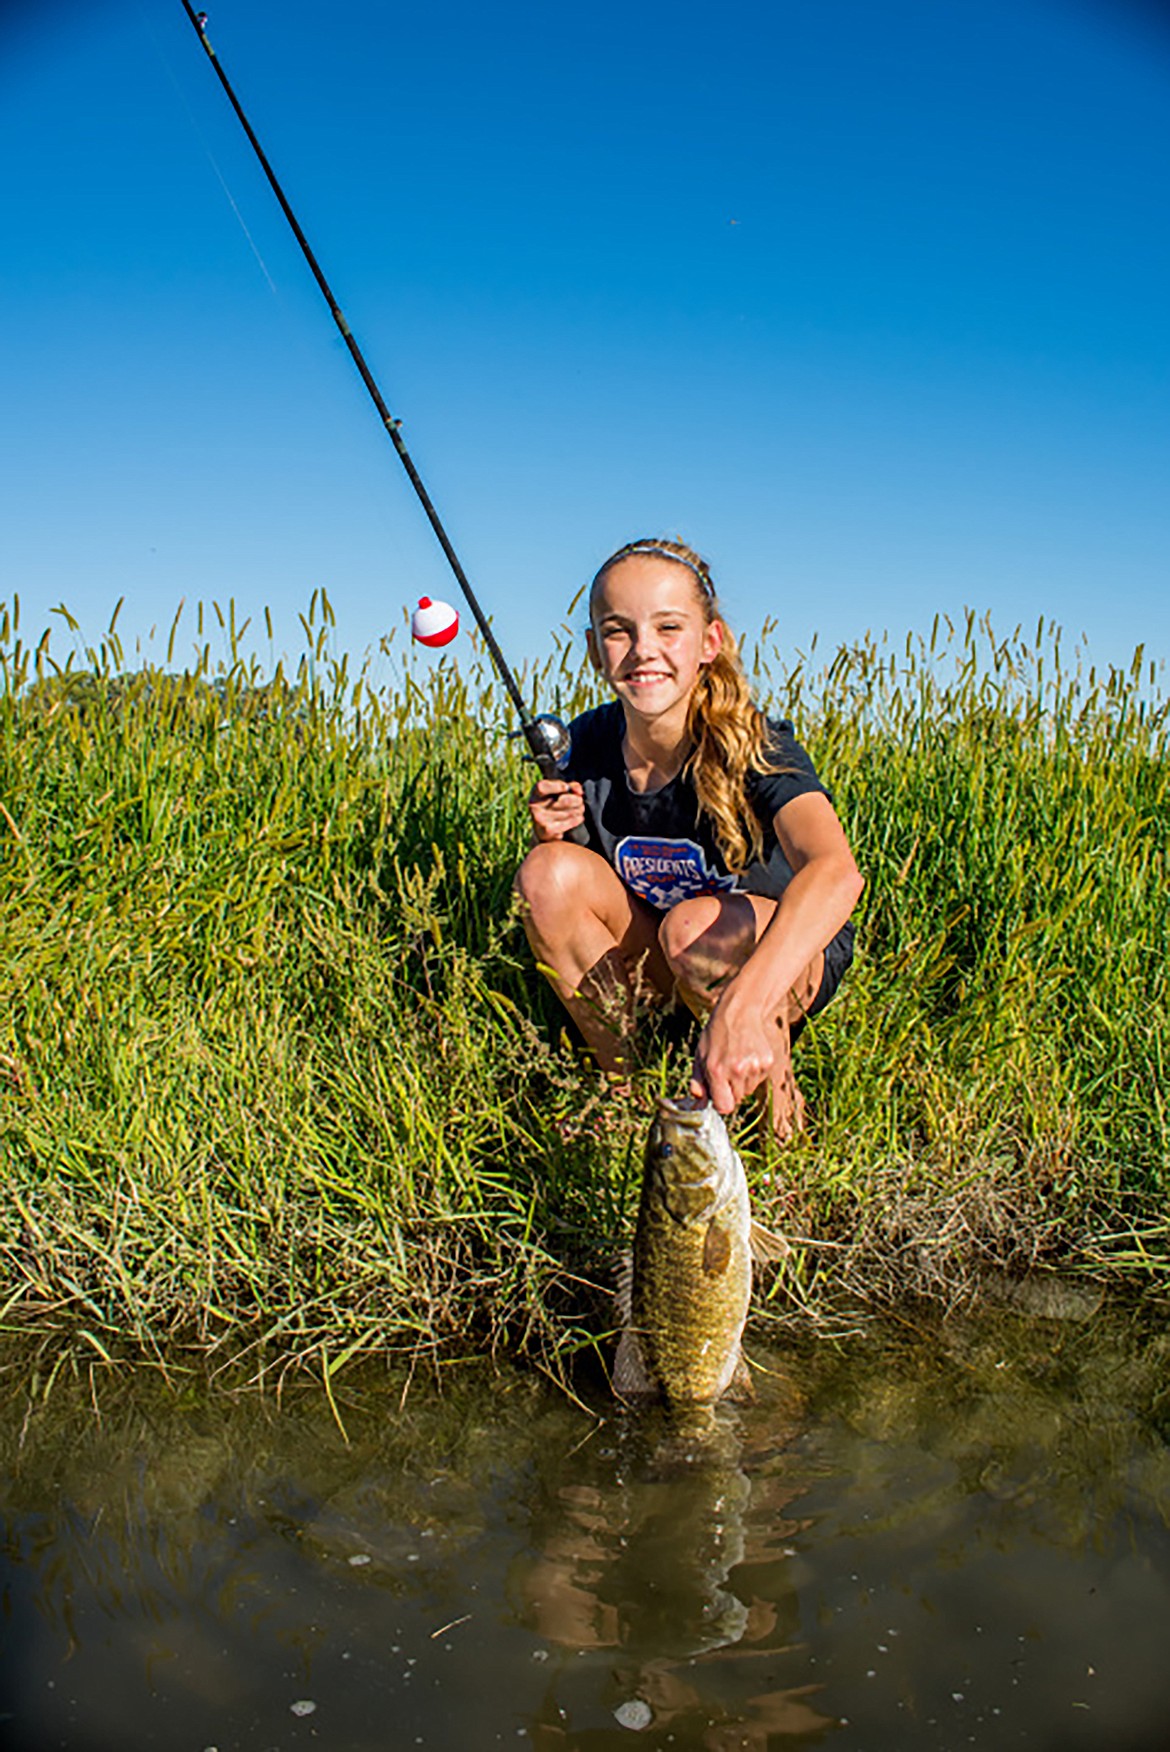 Free Fishing Day offers fun for the whole family